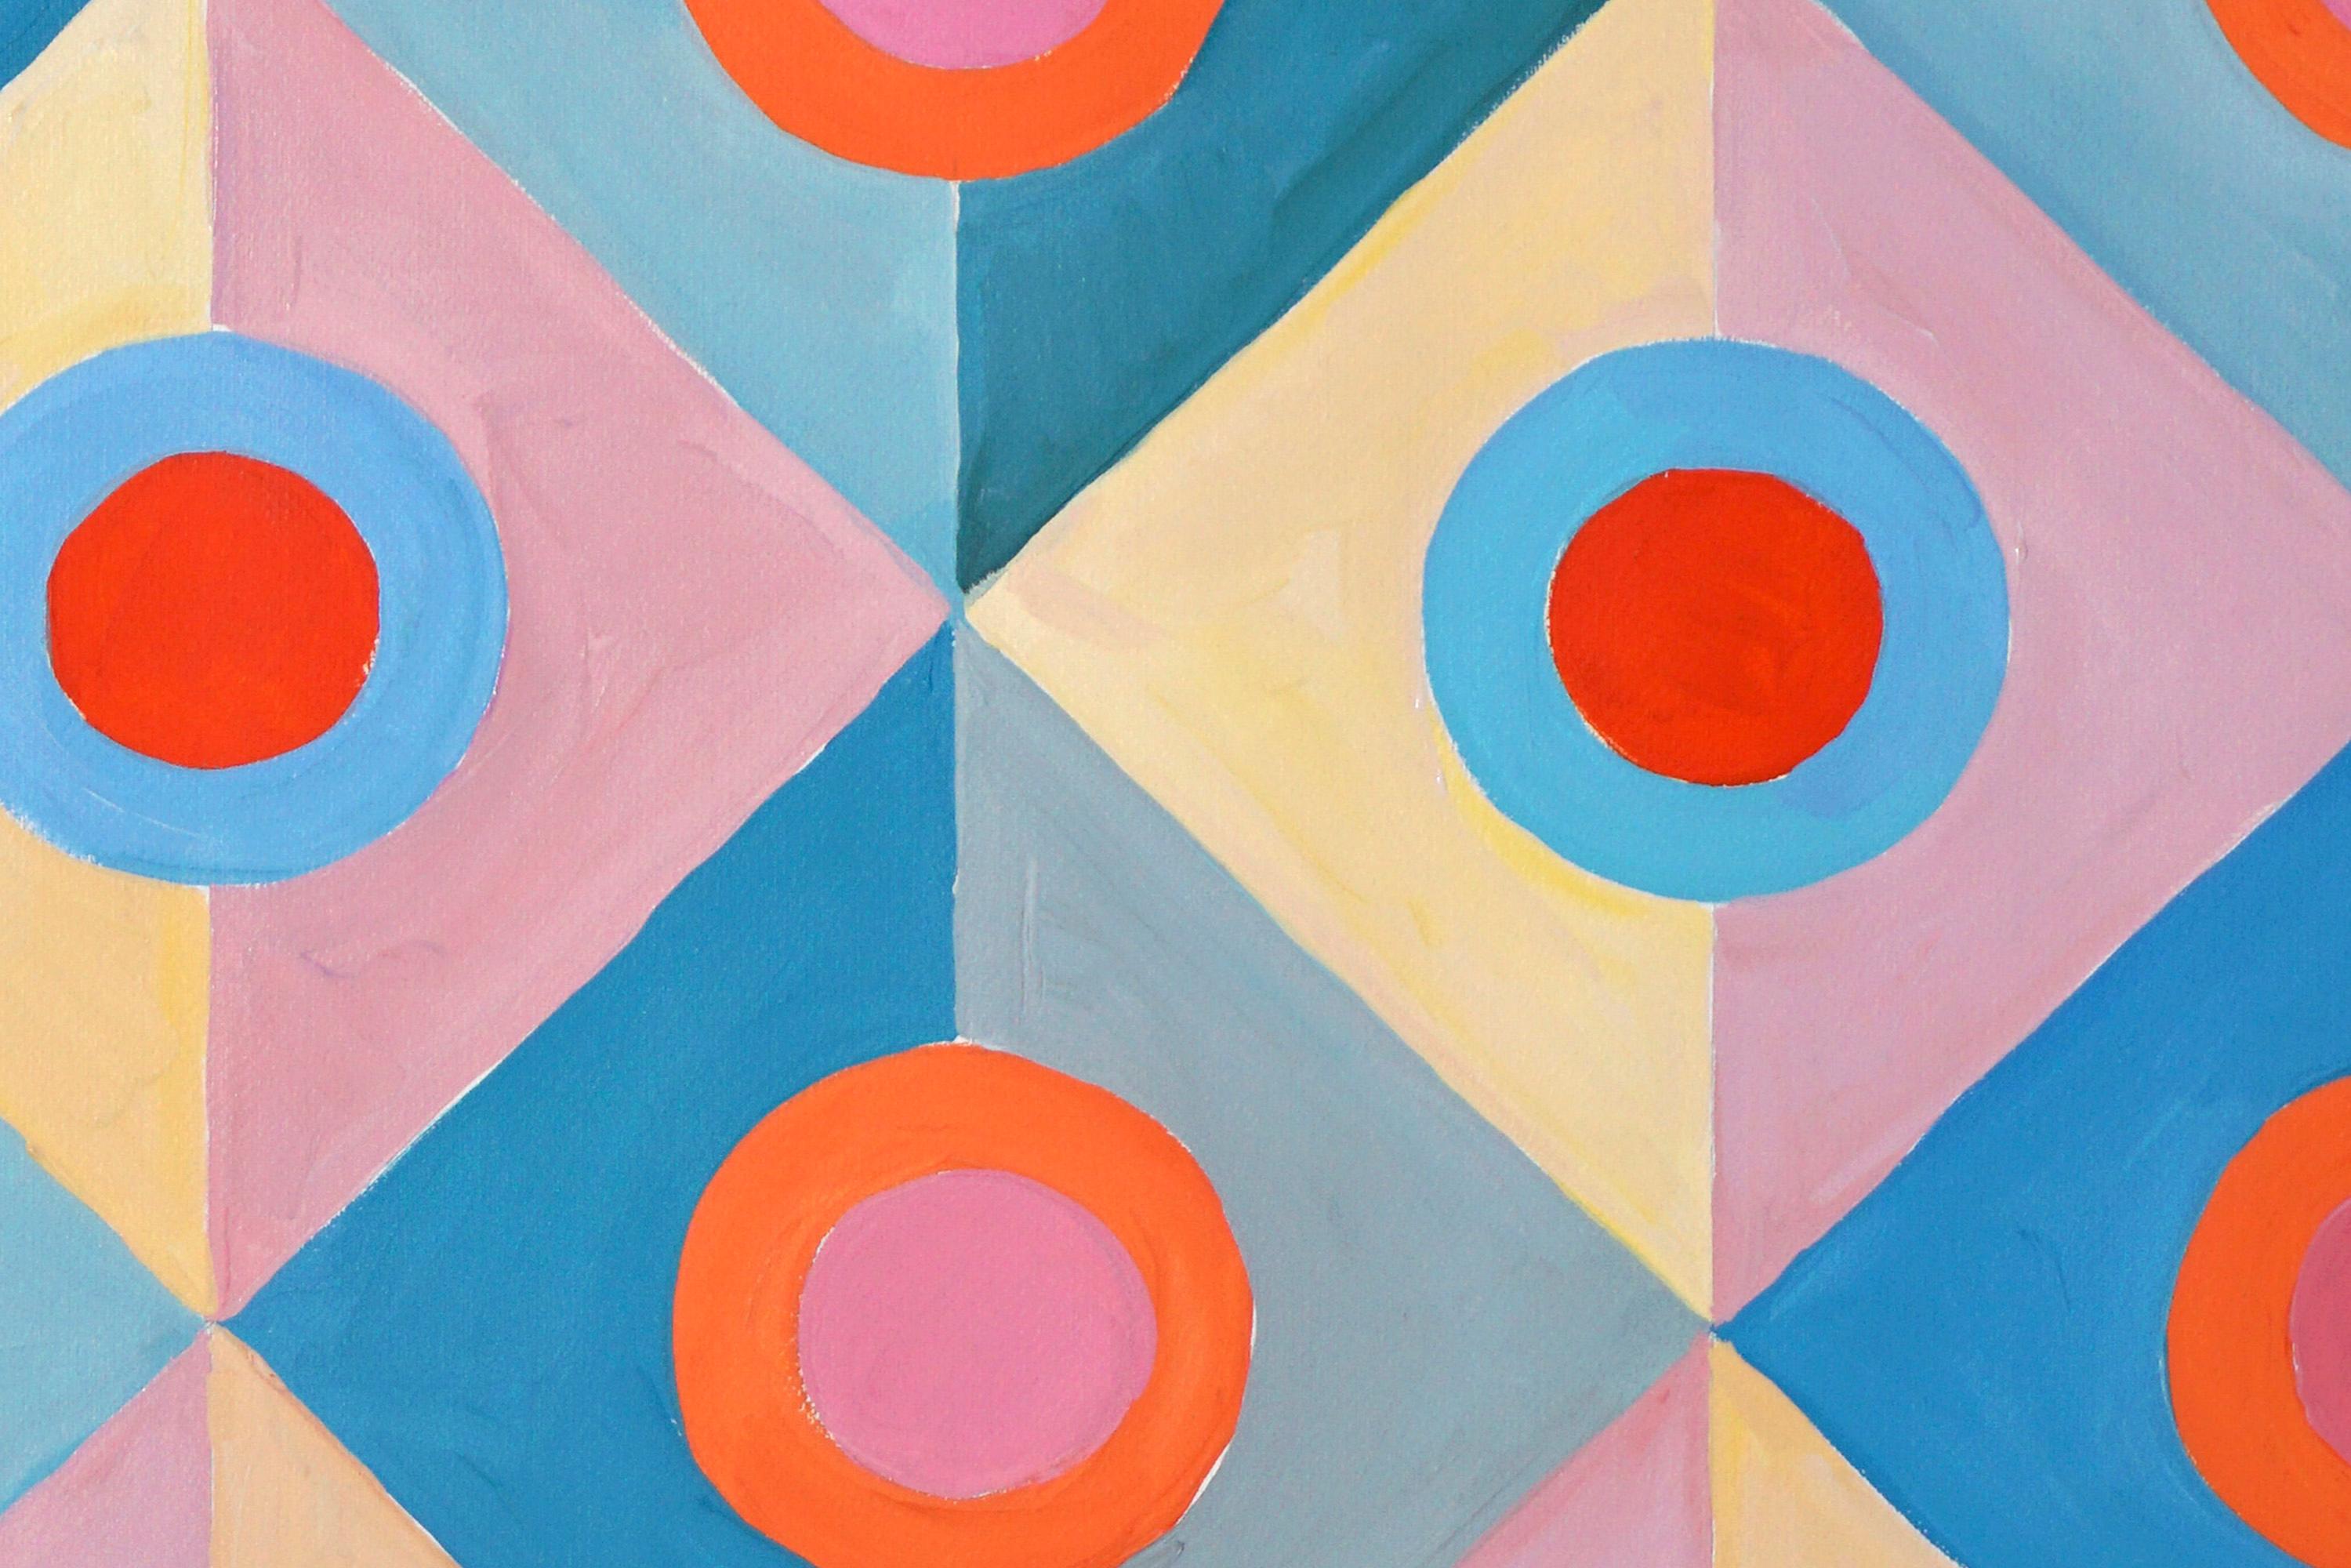 Art Deco Pastel Mirrors, Turquoise and Pink Geometric Tiles Patterns, Symmetry  - Green Landscape Painting by Natalia Roman